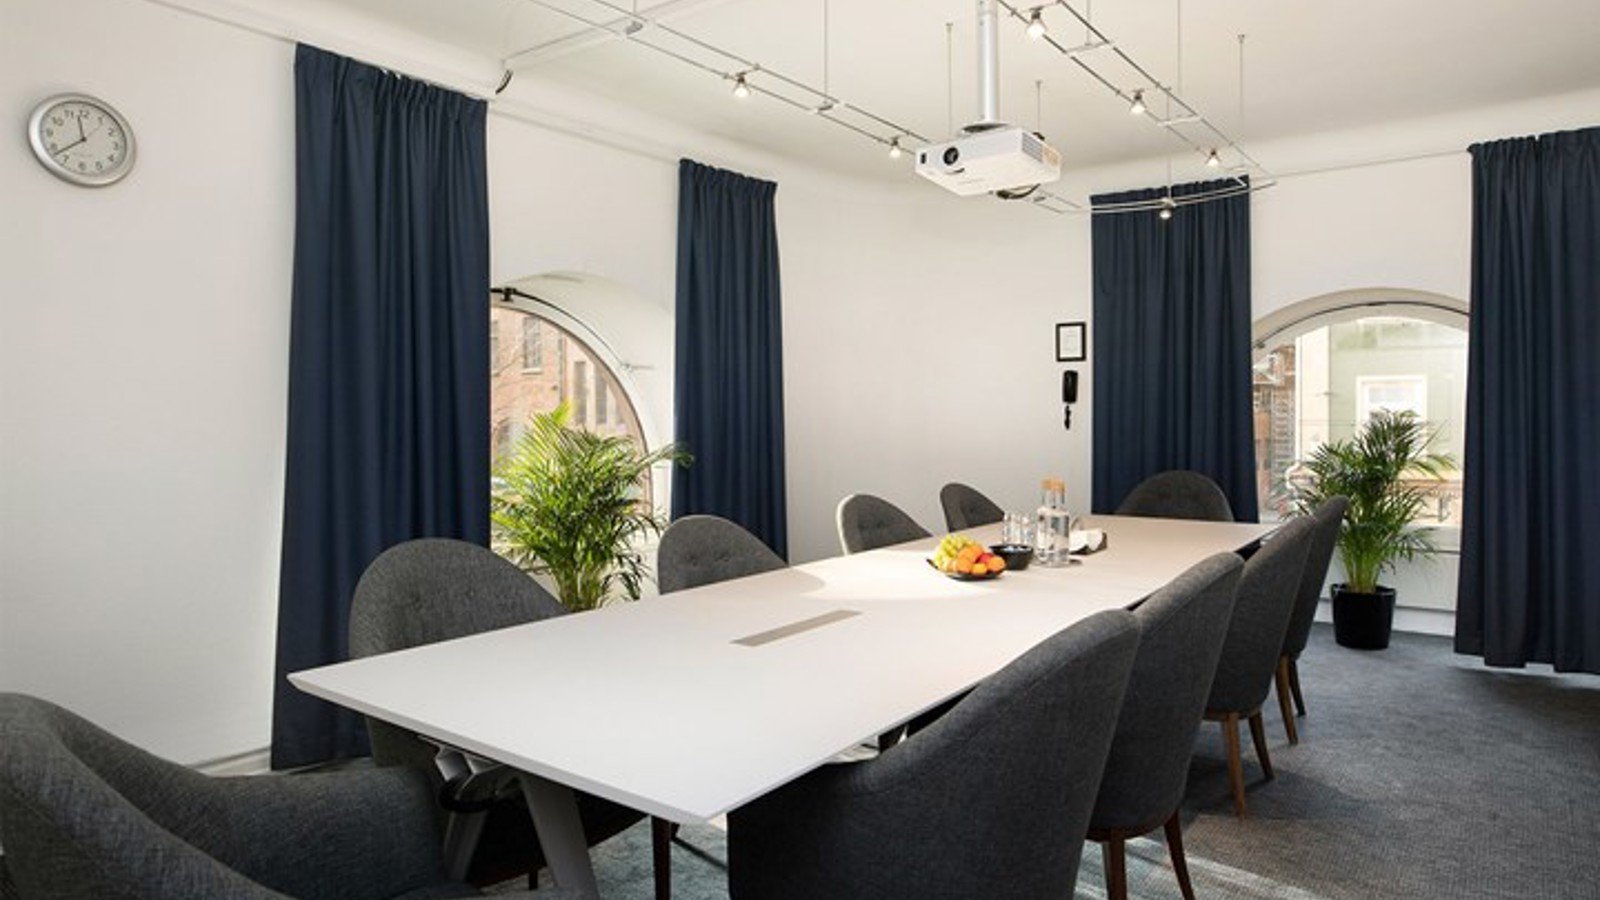 Board room with white walls, large windows and dark curtains